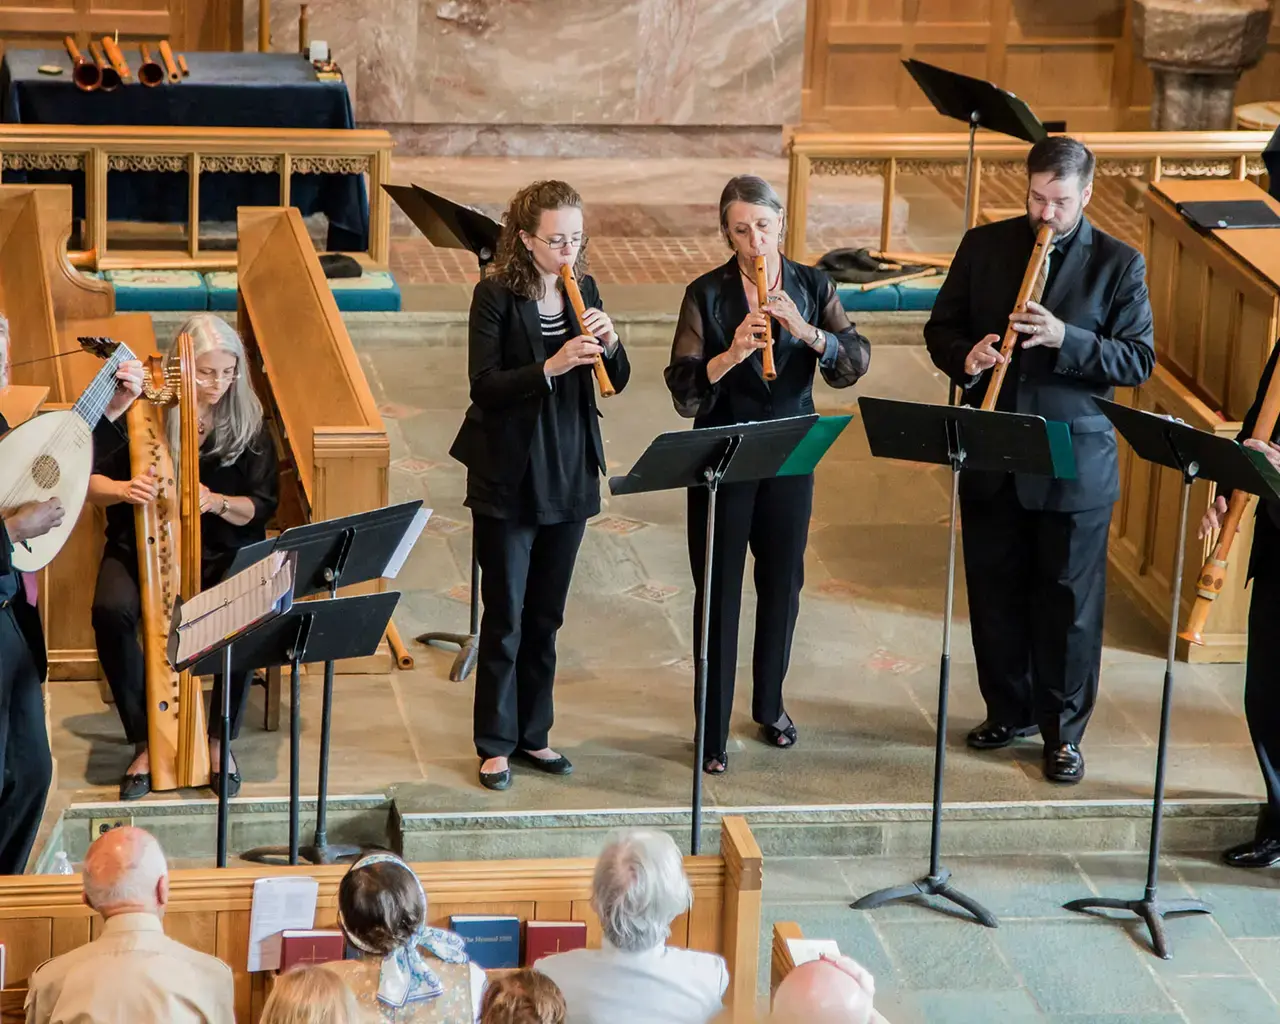 Piffaro, the Renaissance Band in performance in May 2015. Photo by Bill Dicecca.